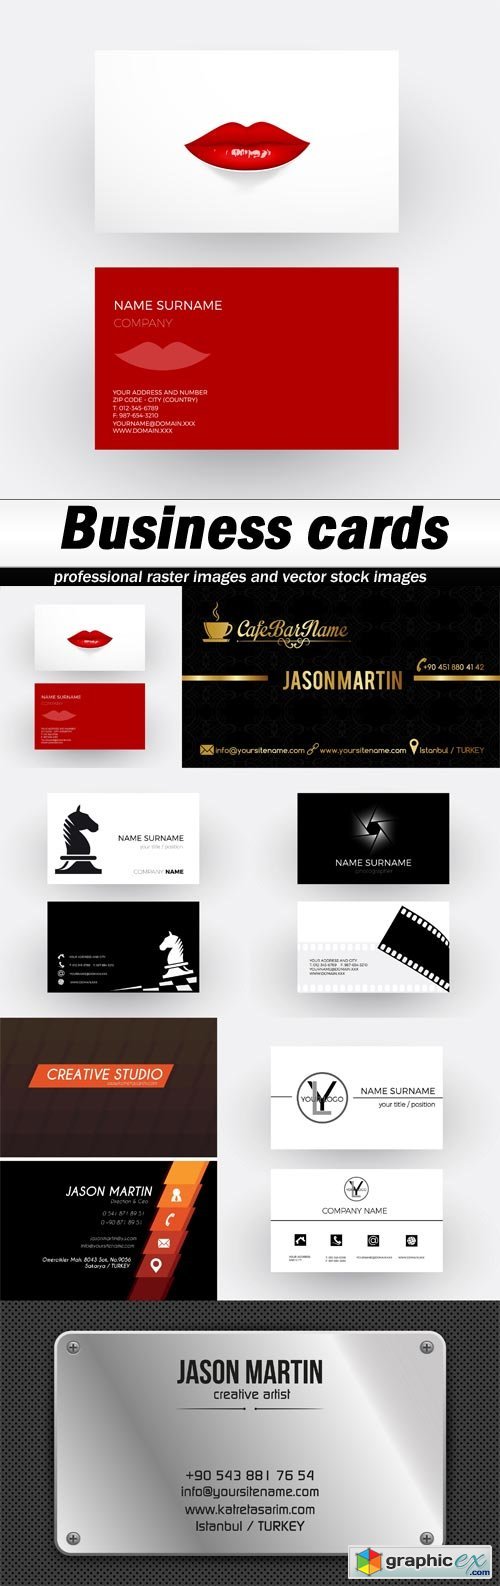 Business cards-7xEPS